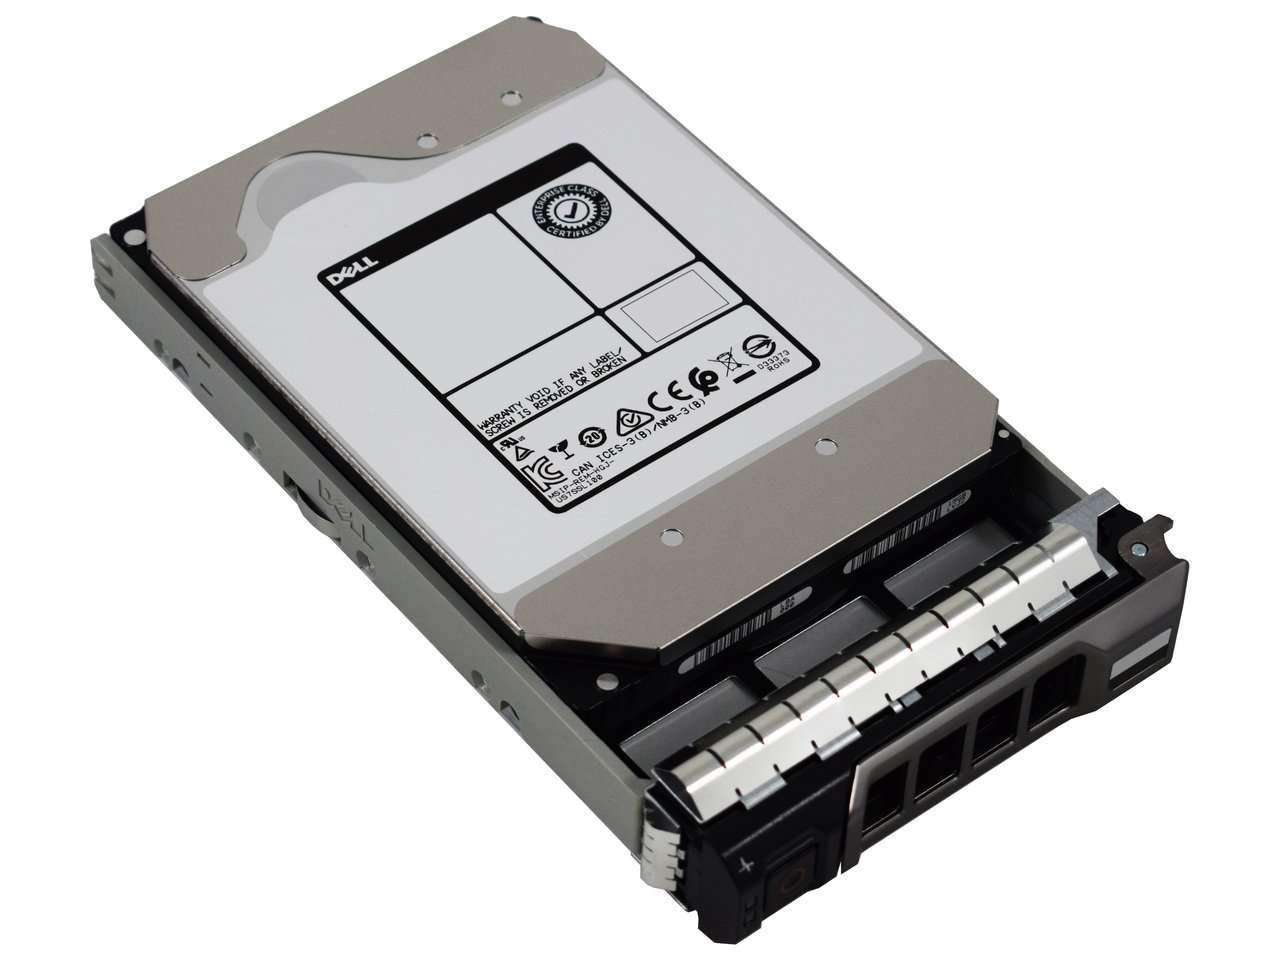 Dell G13 6P85J 4TB 7.2K RPM SAS 6Gb/s 512n 3.5" SED-FIPS Manufacturer Recertified HDD